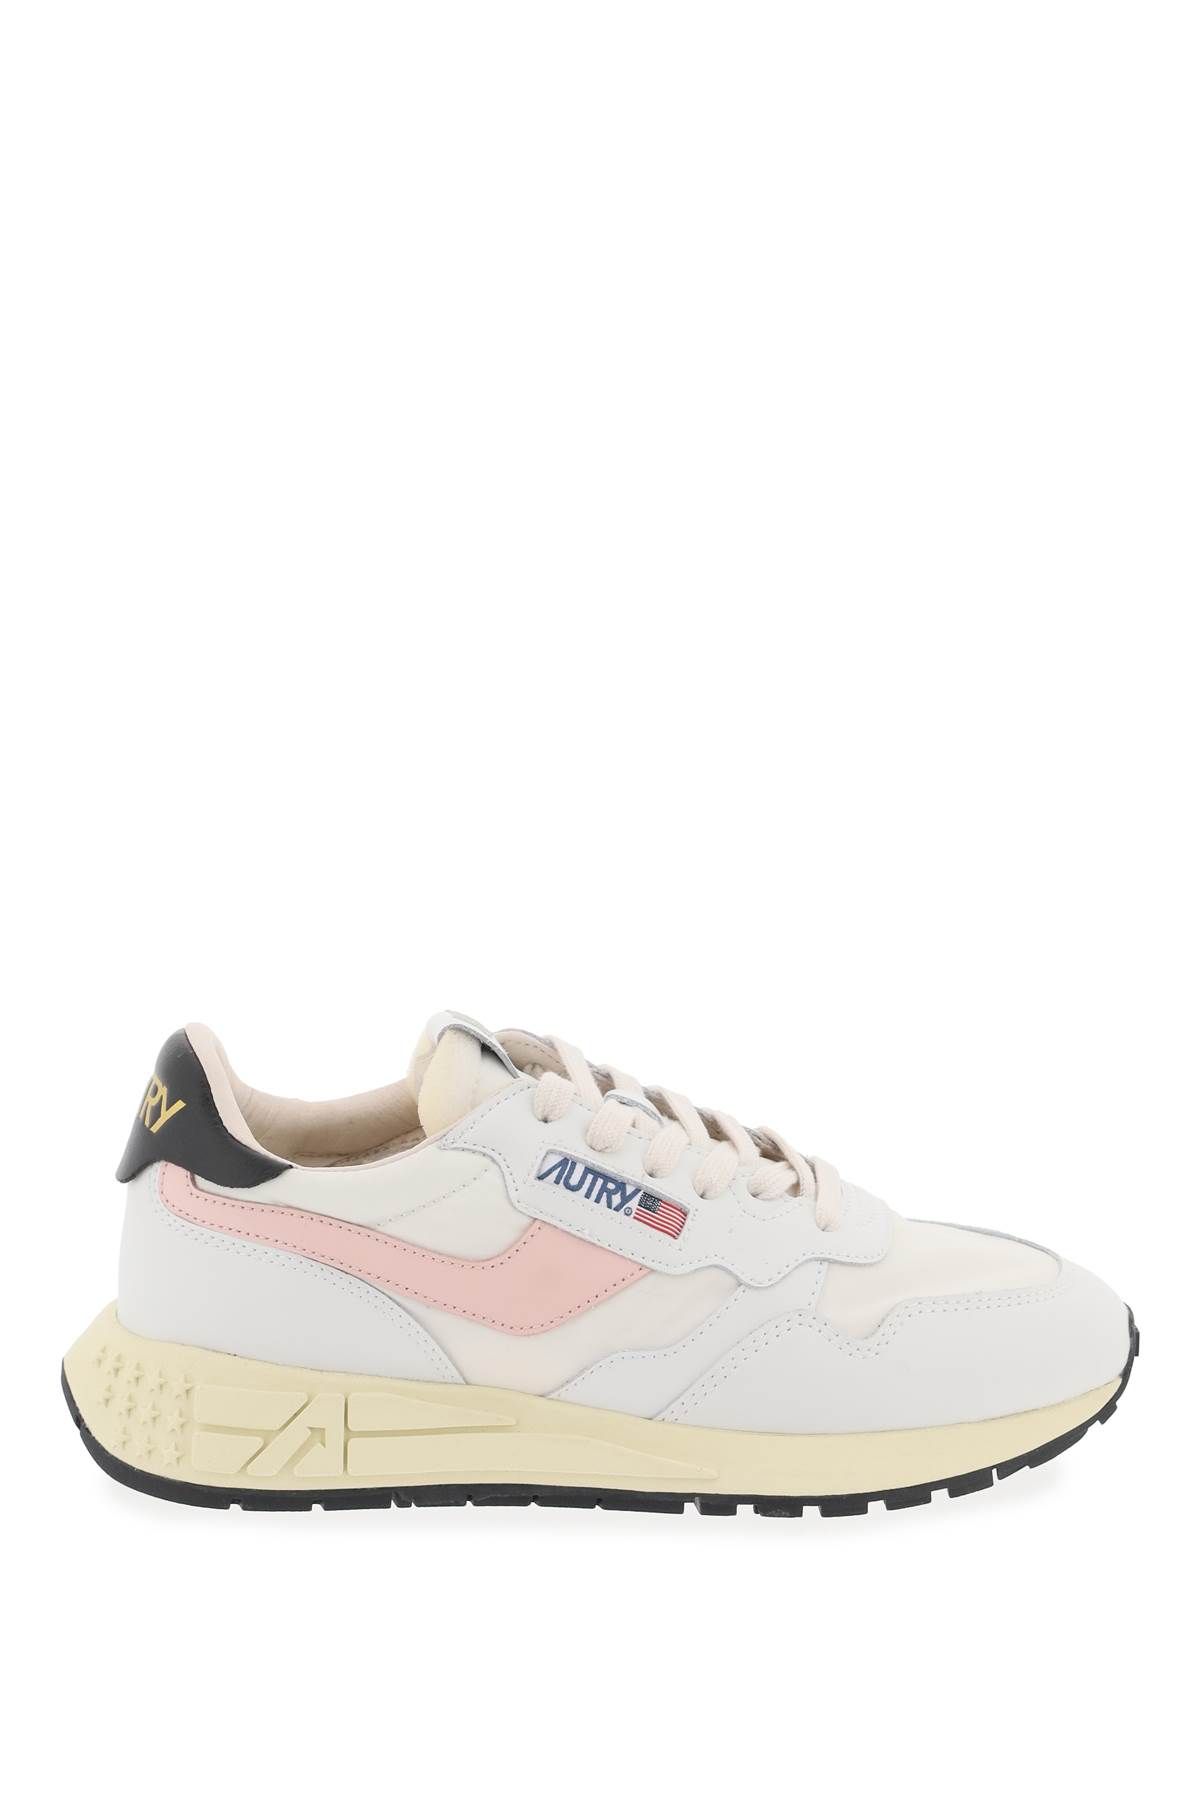 Shop Autry Low-cut Nylon And Leather Reelwind Sneakers In White,pink,black